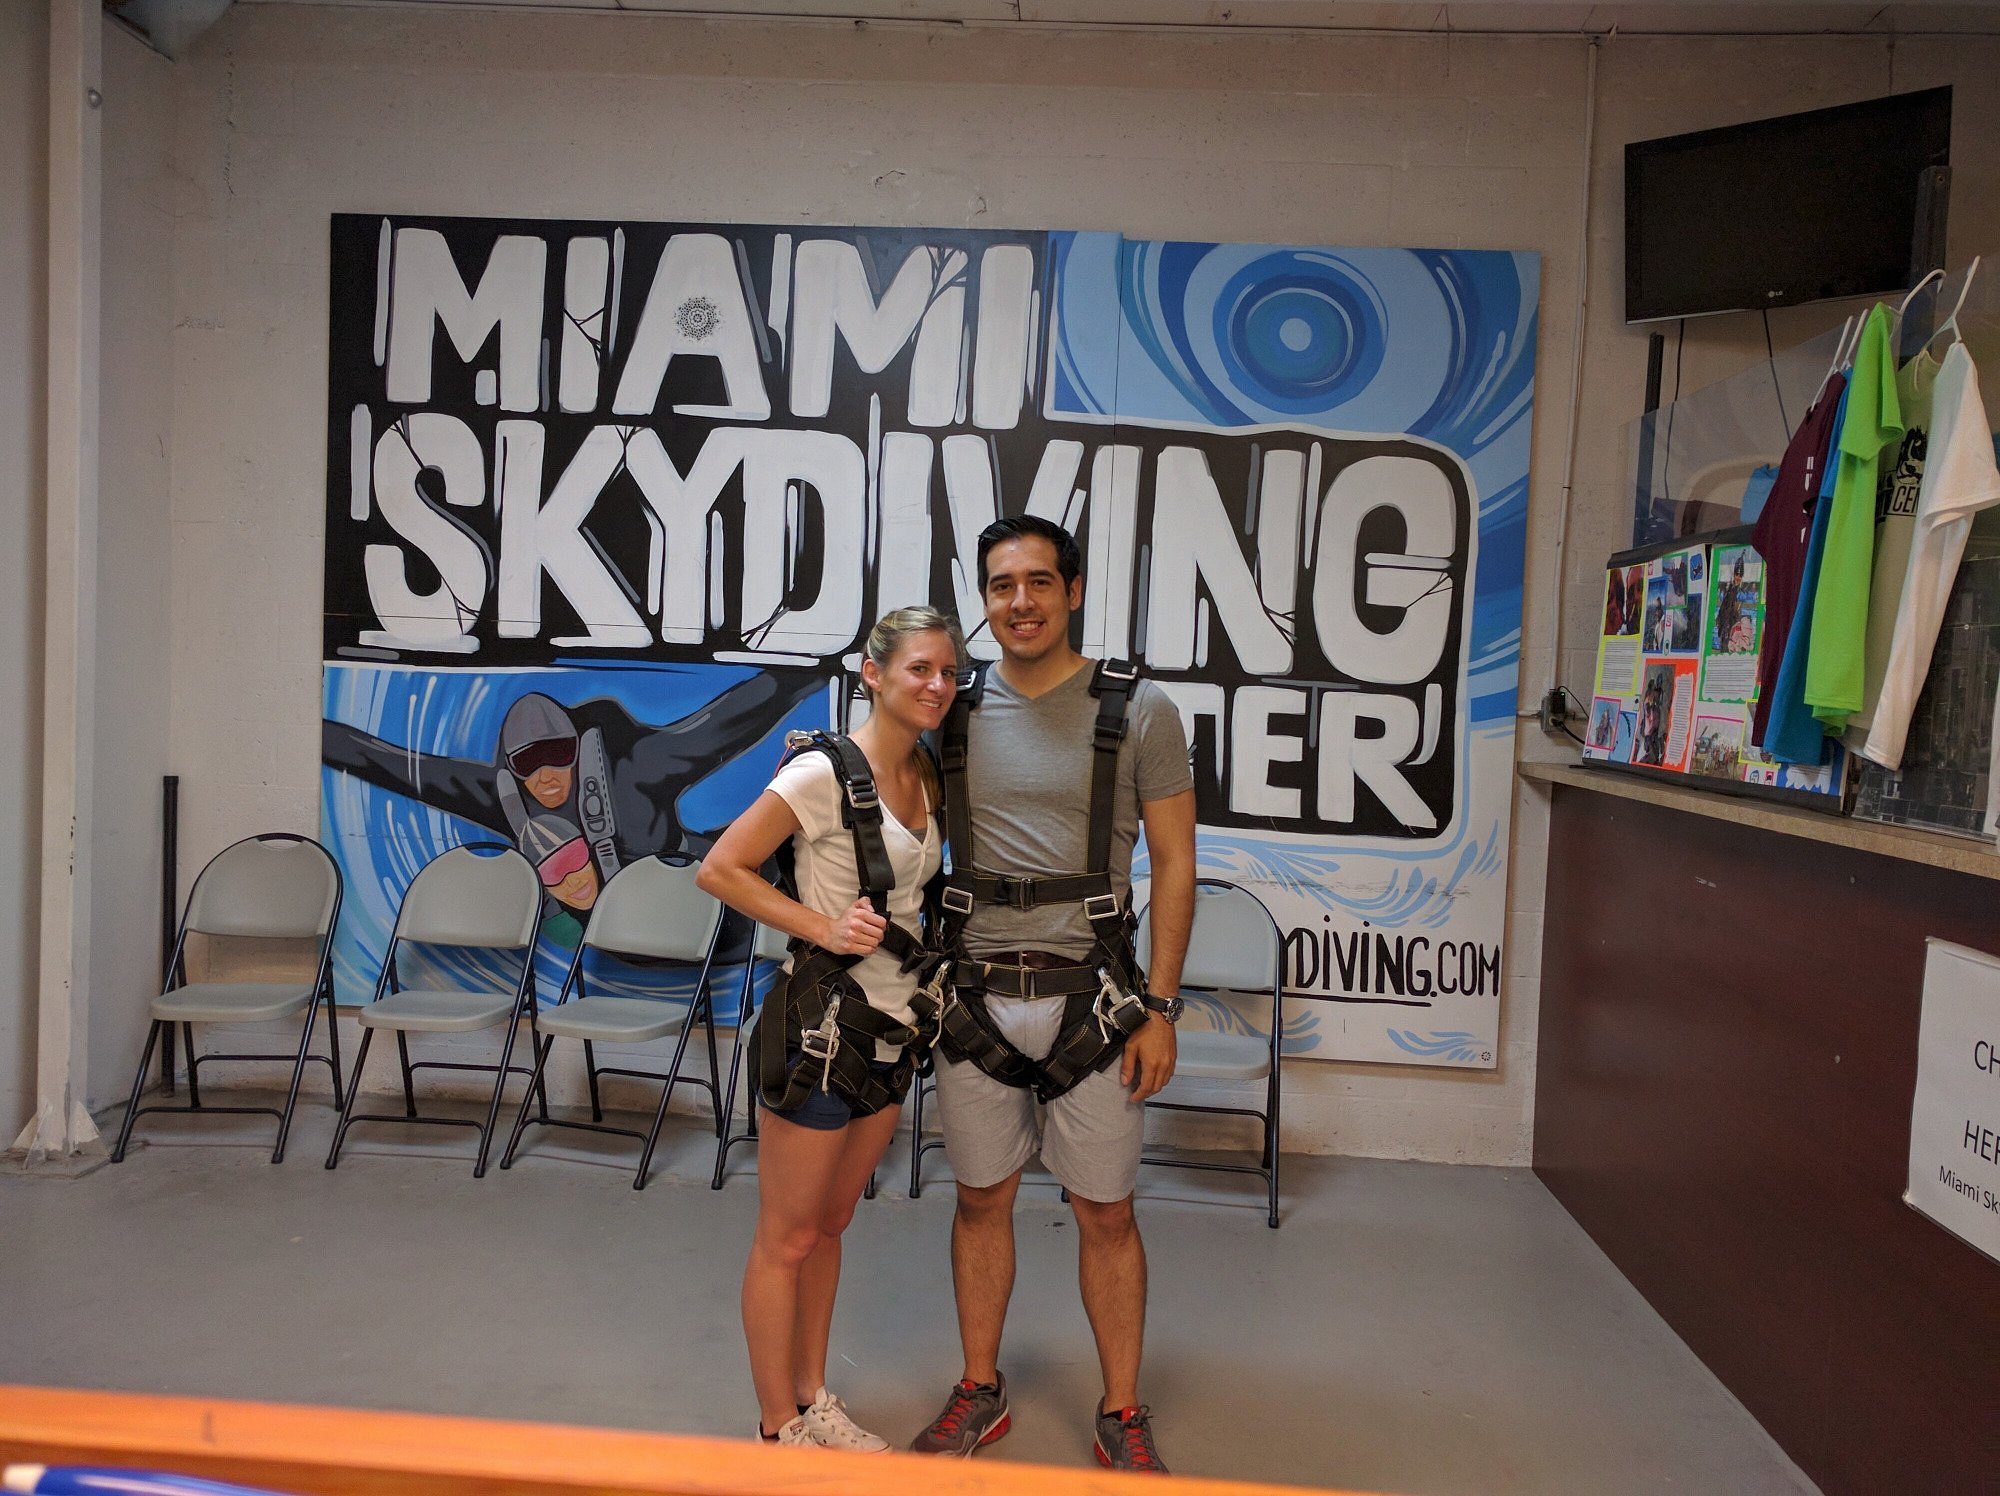 Miami Skydiving Center All You Need to Know BEFORE You Go